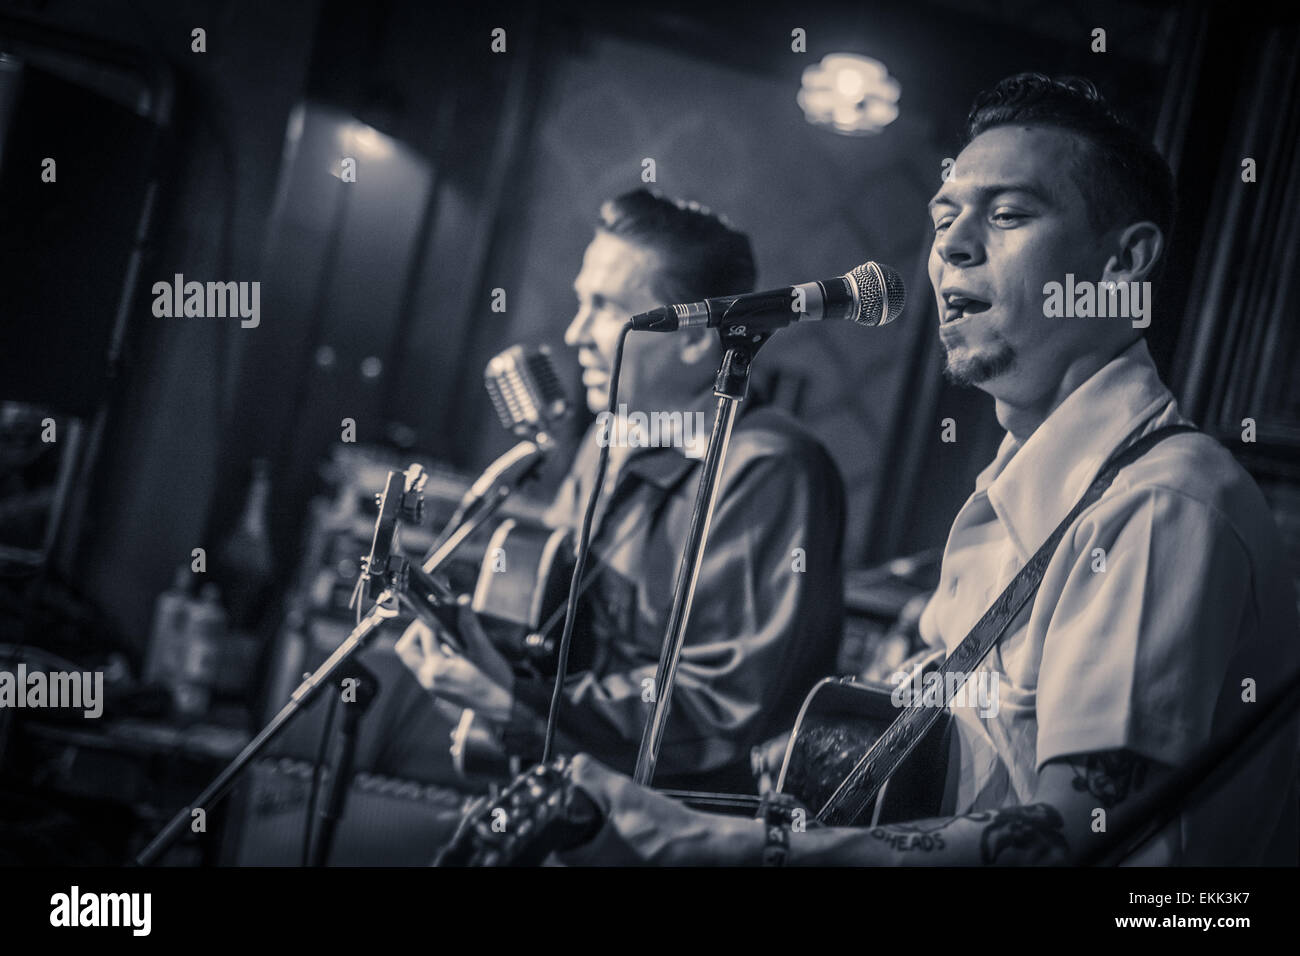 The Wise Guyz, a vintage rockabilly band from the Ukrain, in concert Stock Photo